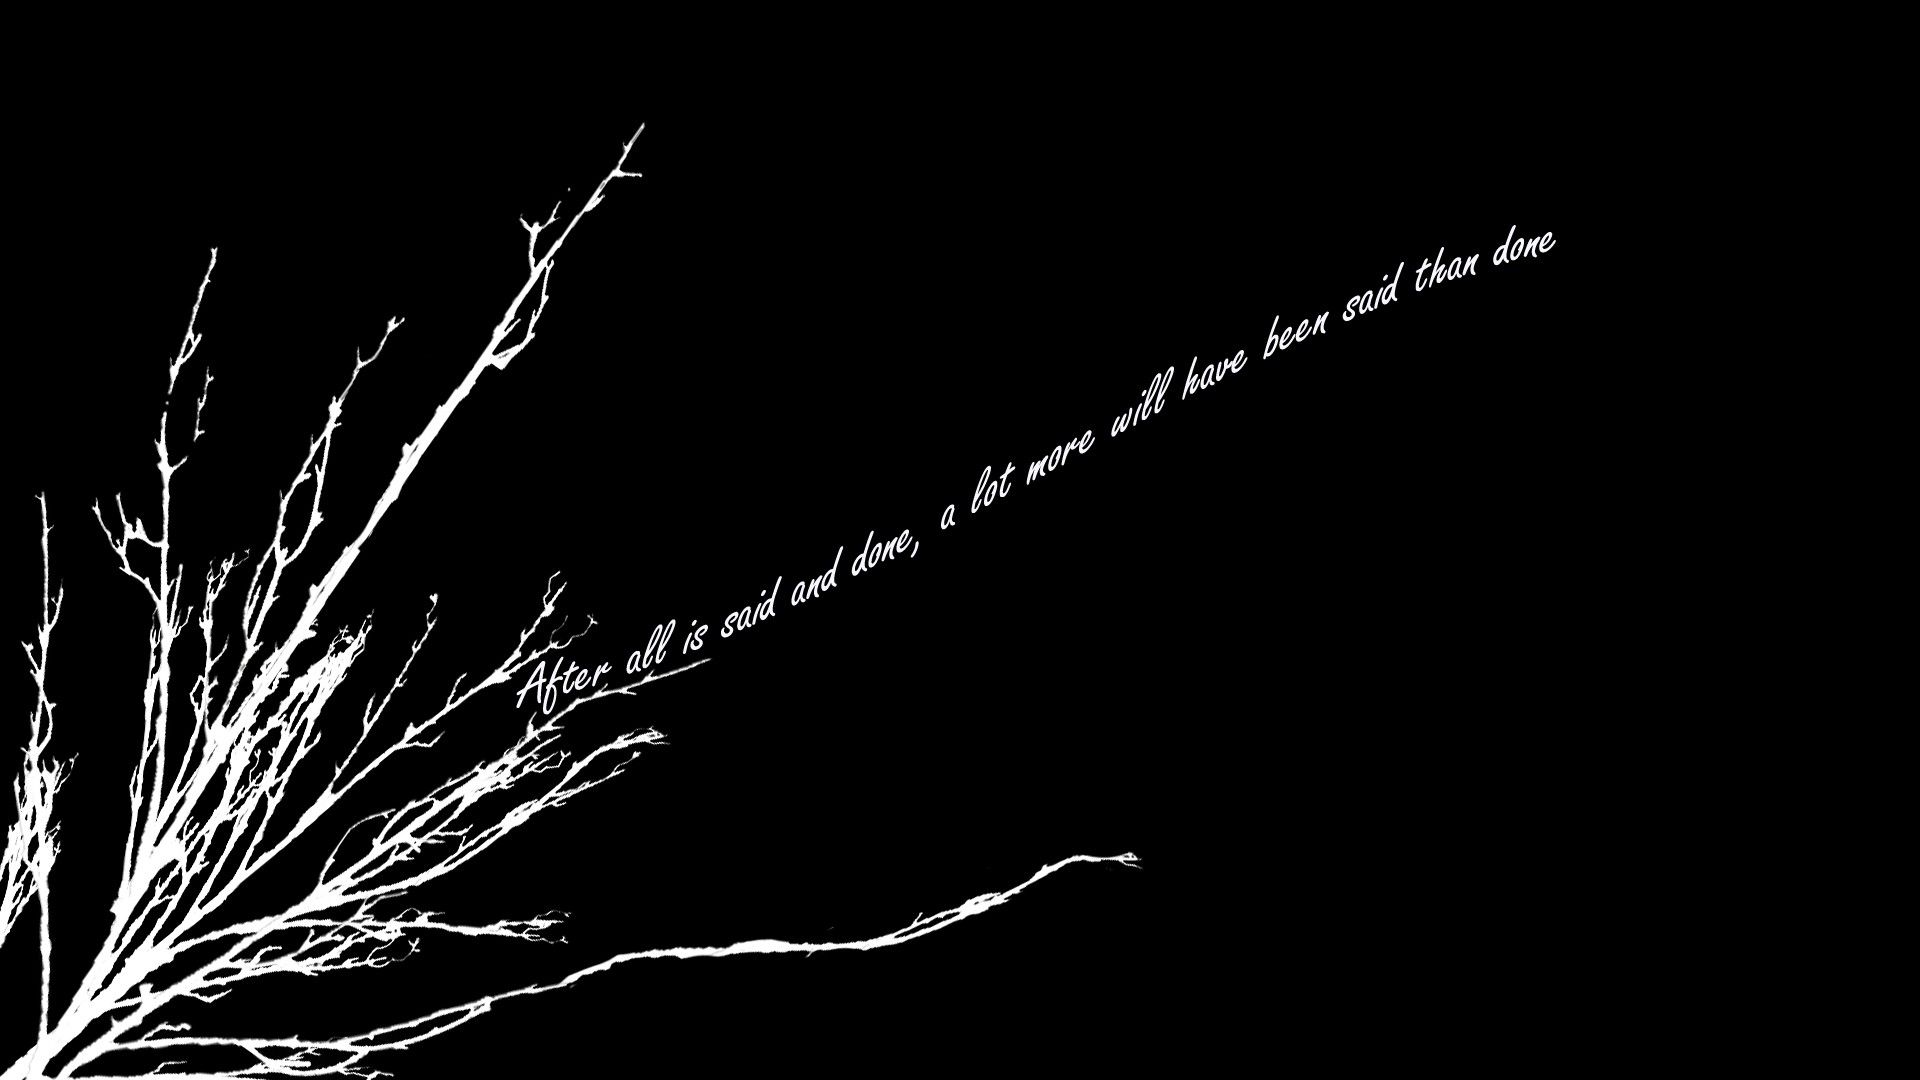 A black and white photo of branches with writing - Black, black quotes, dark